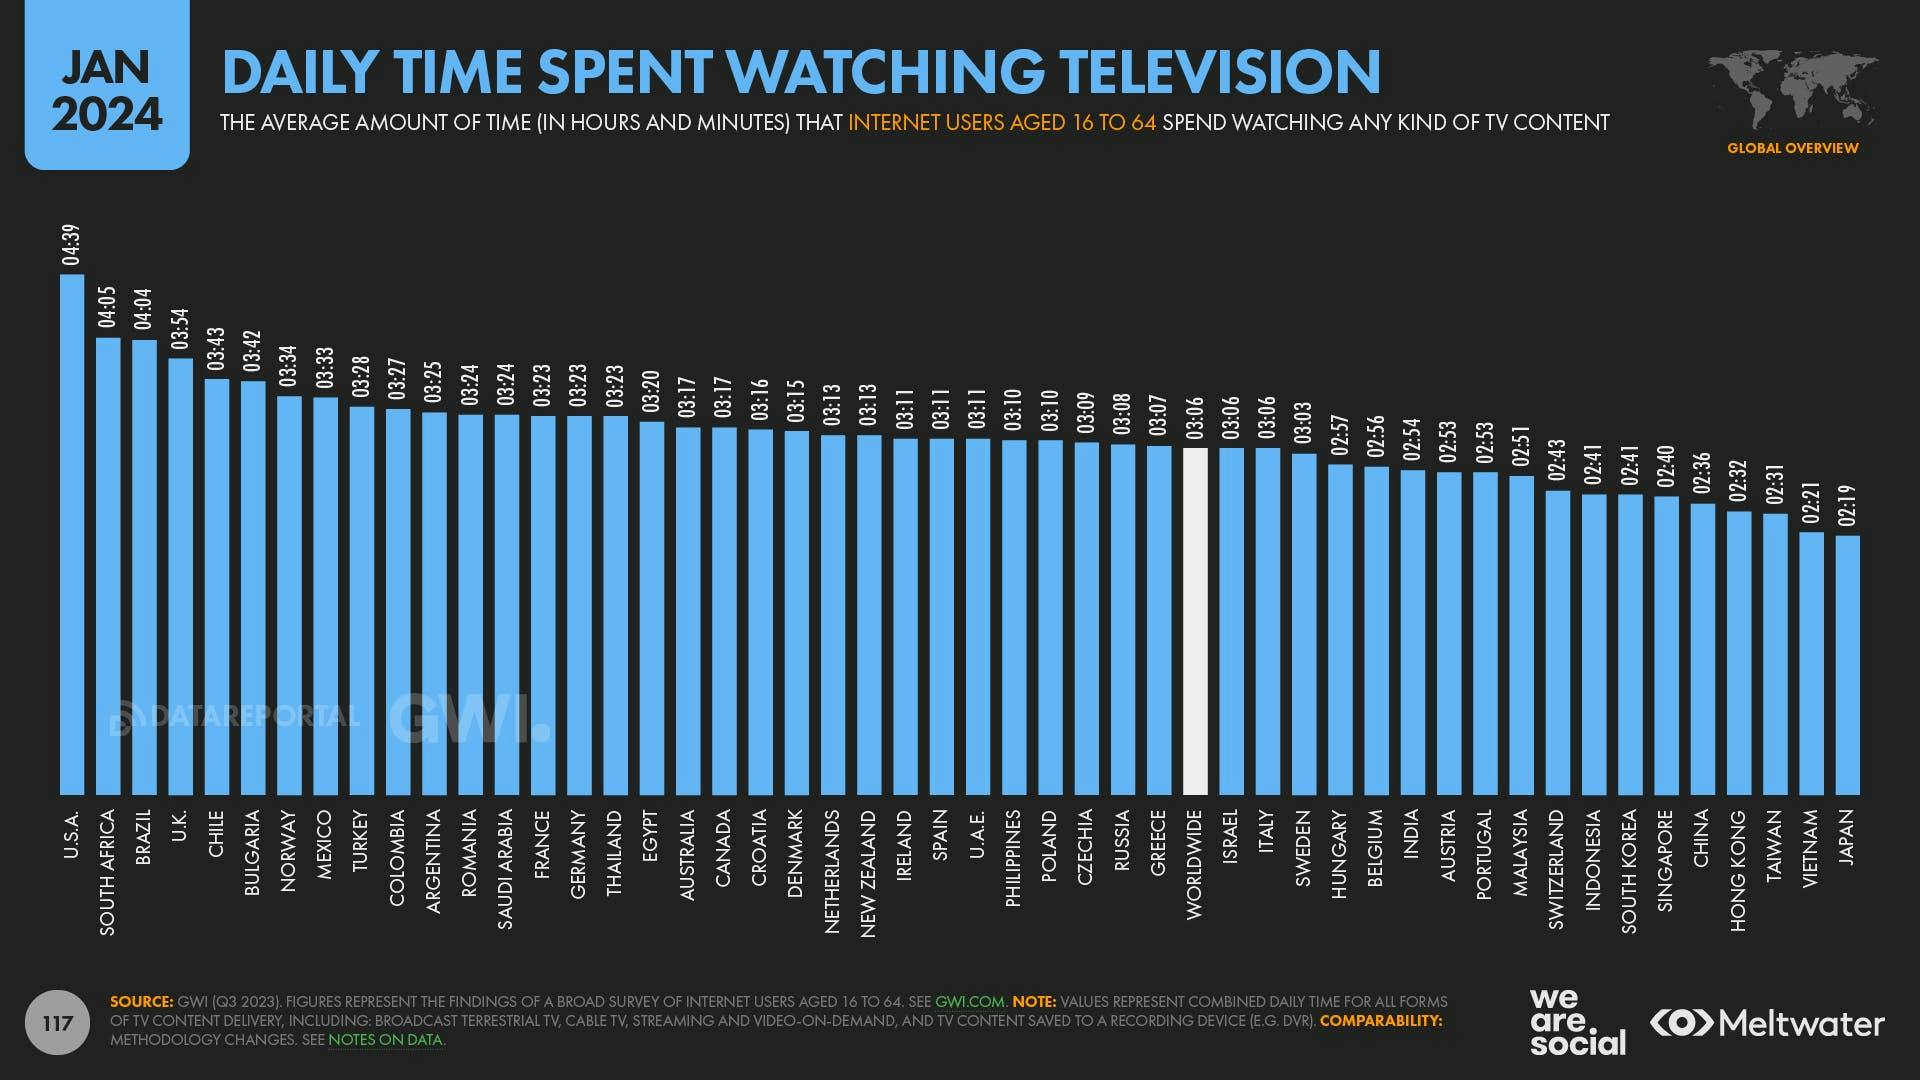 Daily tie spent watching television by country